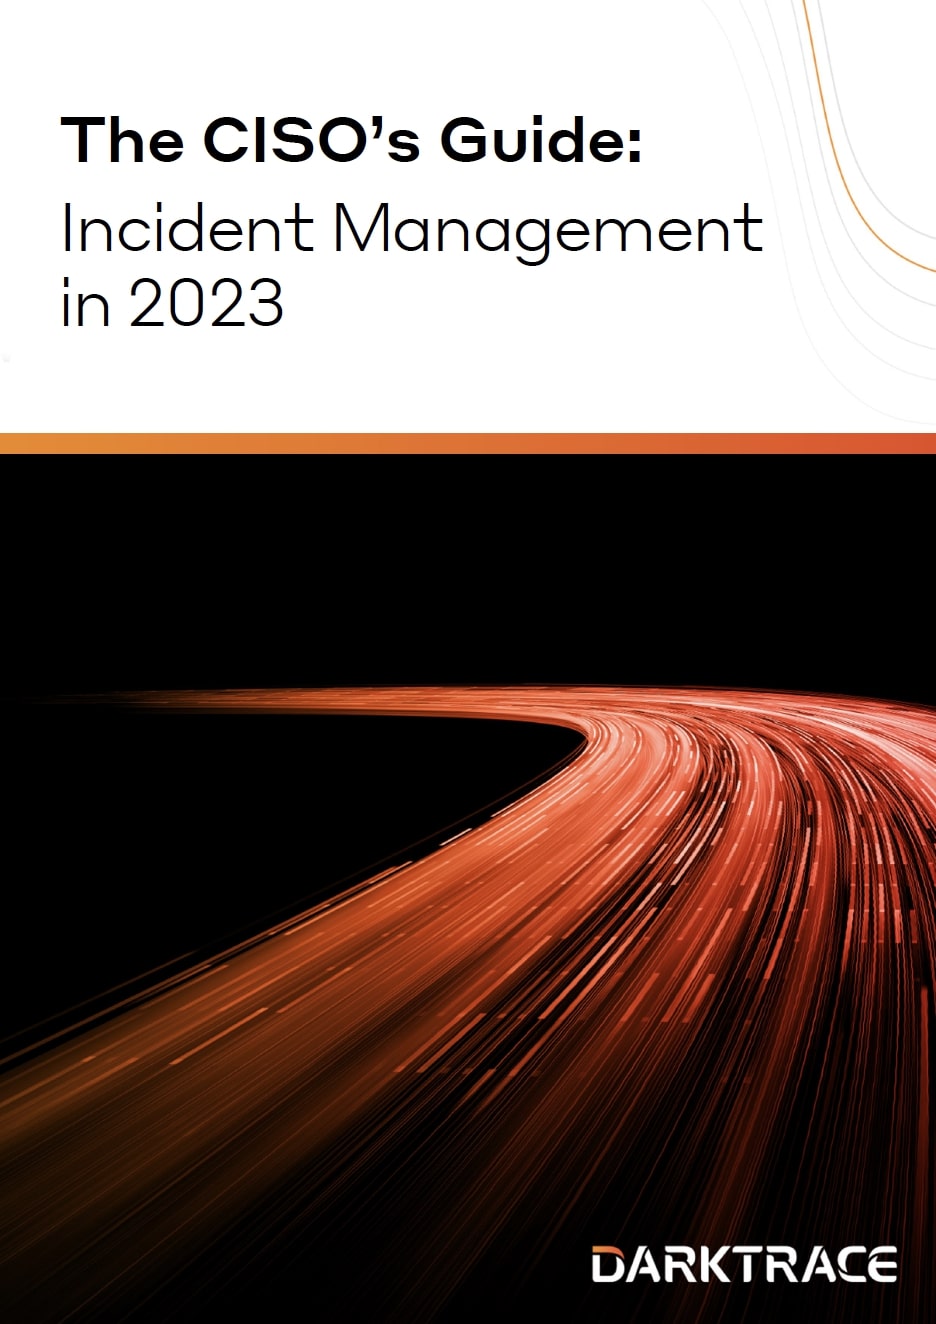 The CISO's Guide to Incident Management in 2023